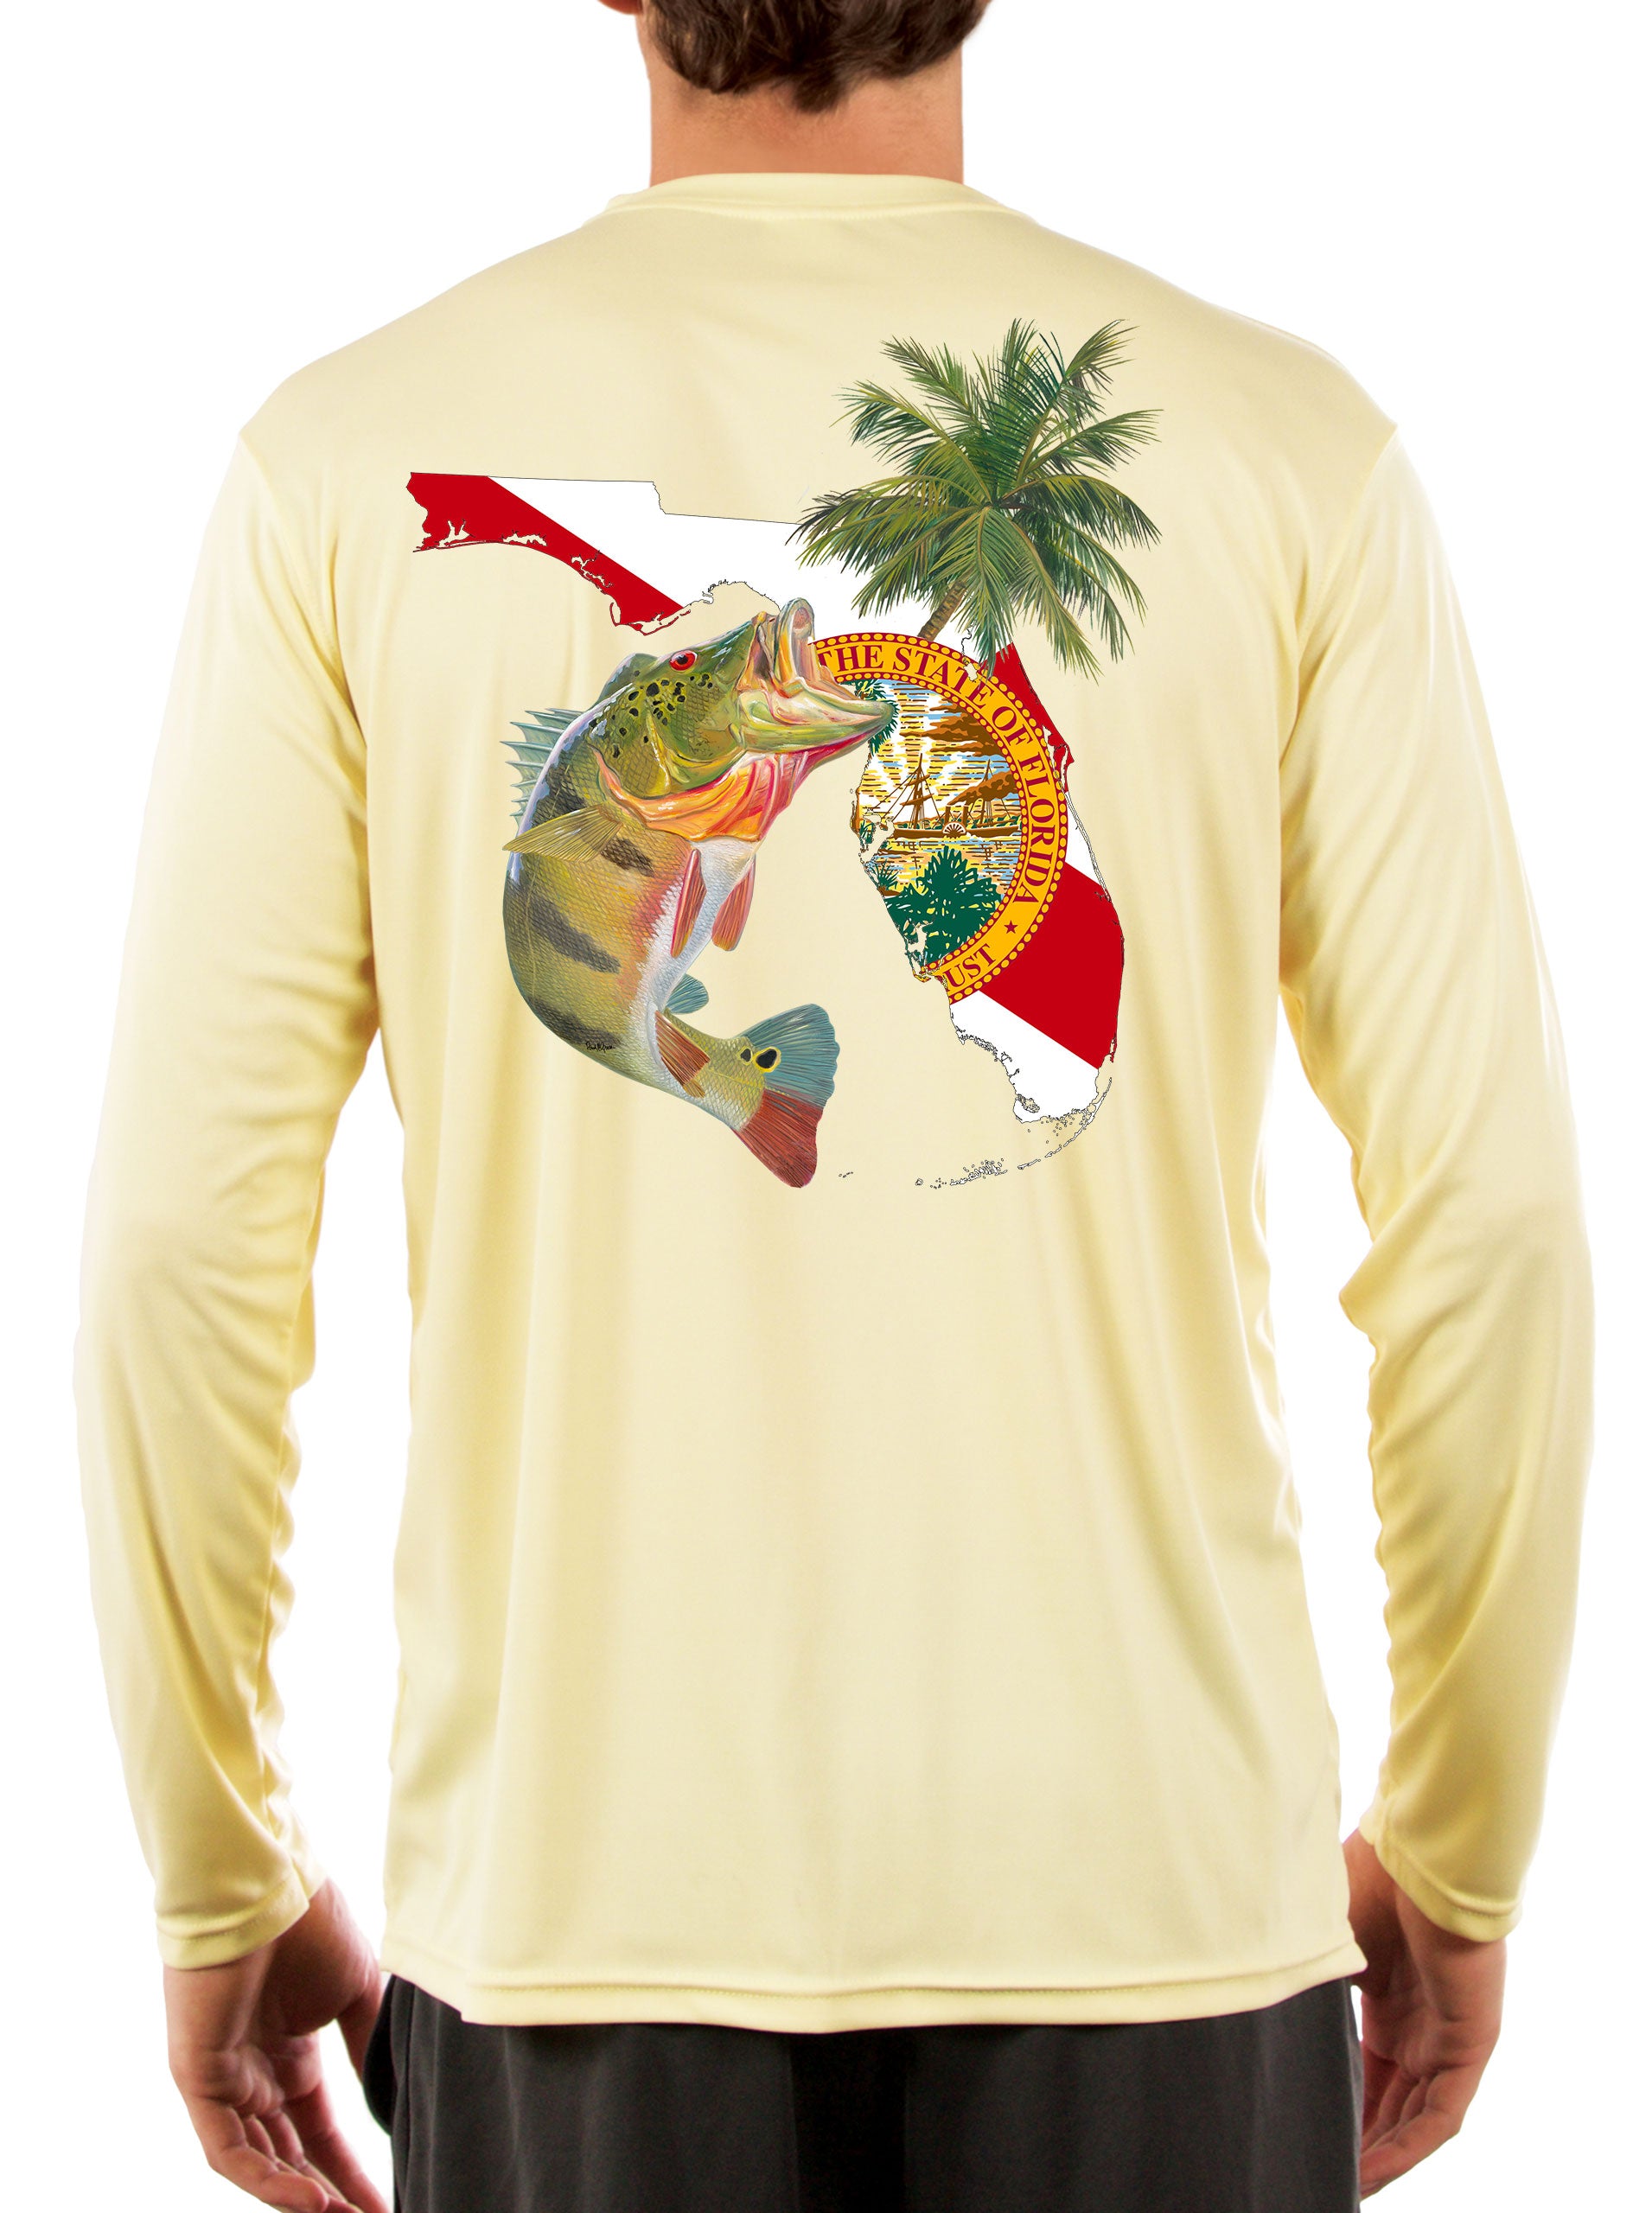 New Artwork] Peacock Bass Florida Map Fishing Shirts for Men with Flo